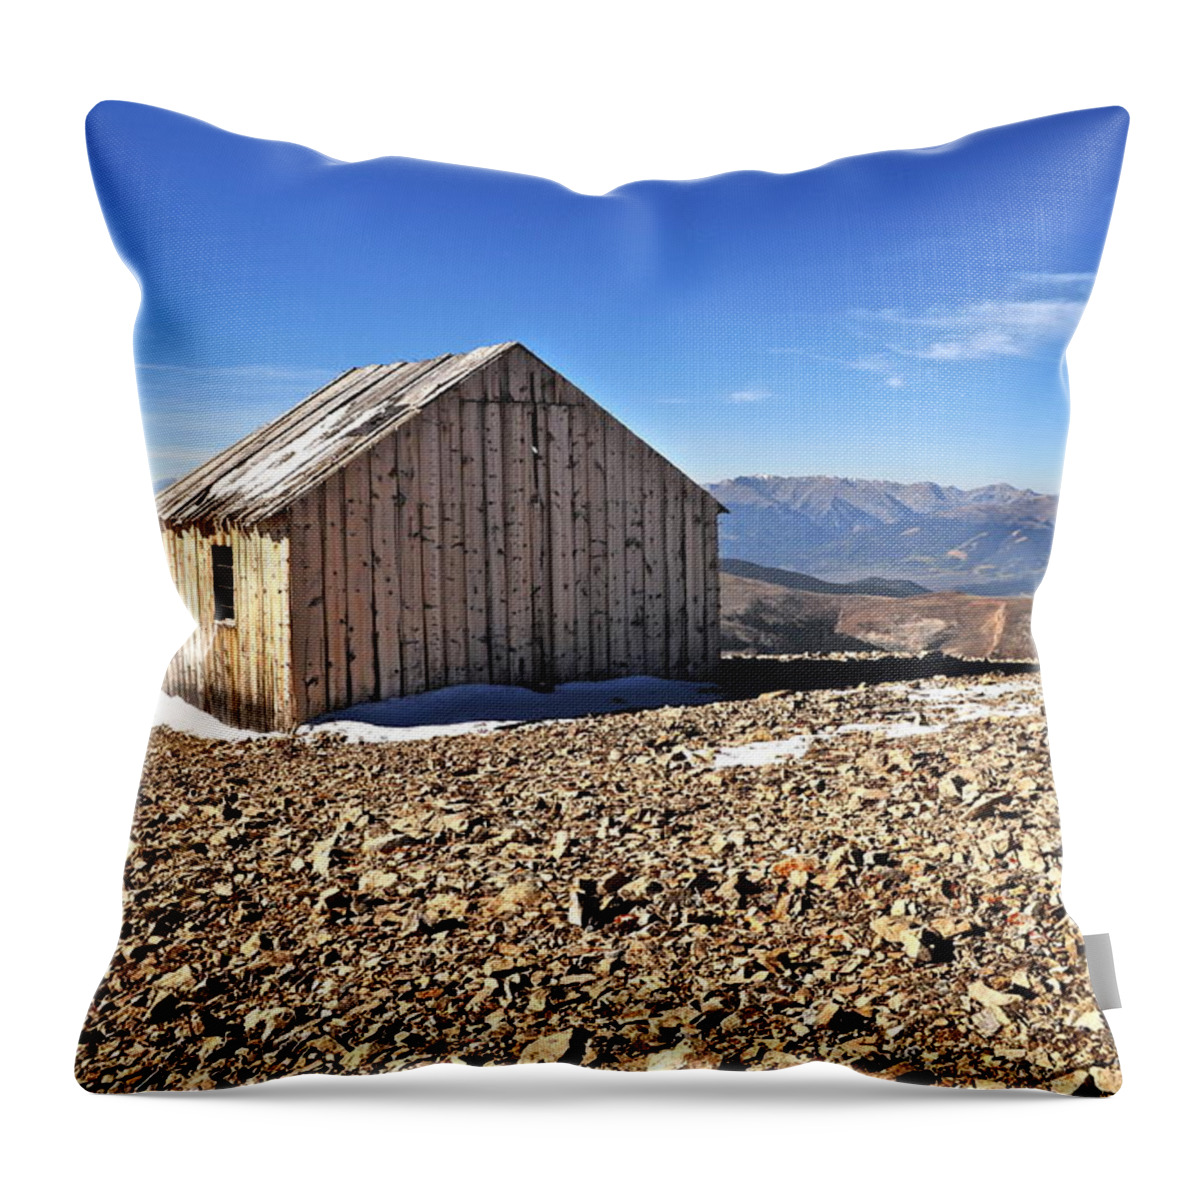 Colorado Throw Pillow featuring the photograph Horseshoe Mountain Mining Shack by Aaron Spong